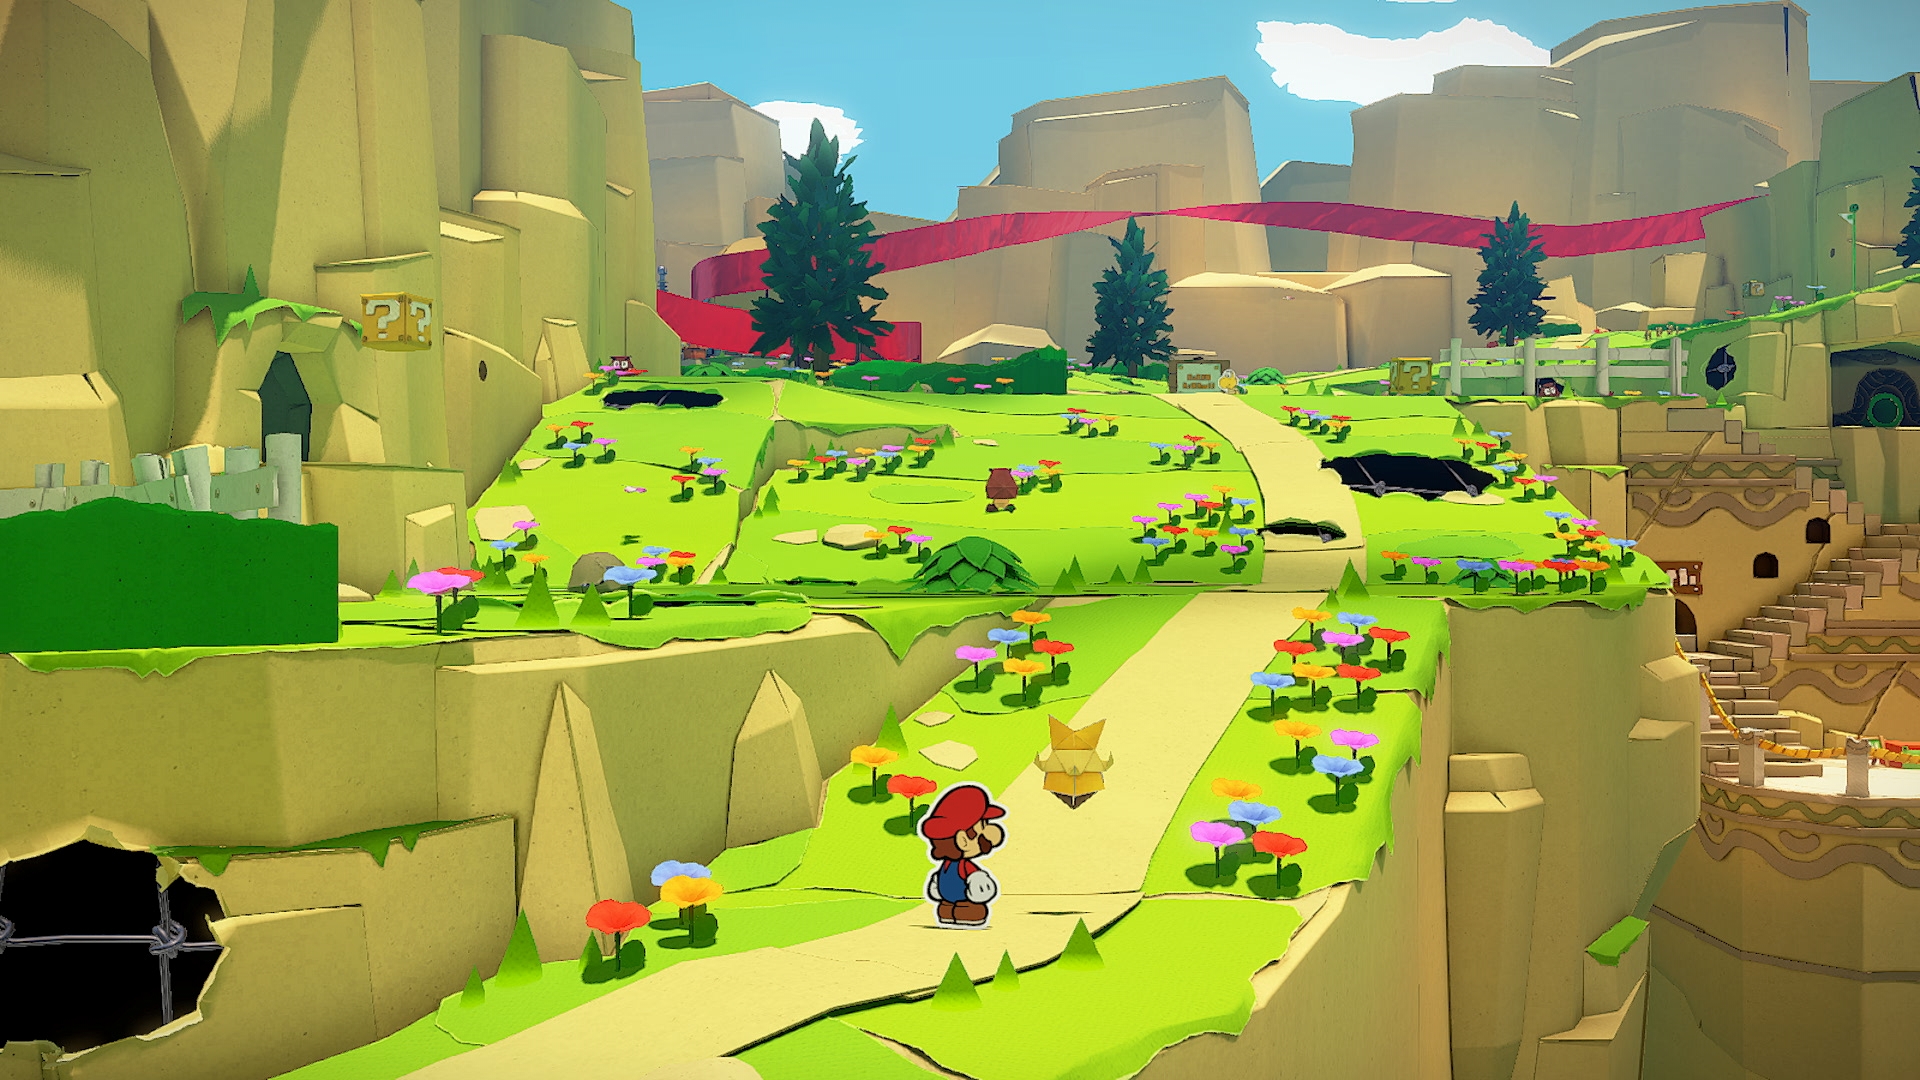 A New Paper Mario Adventure Unfolds for Nintendo Switch on July 17